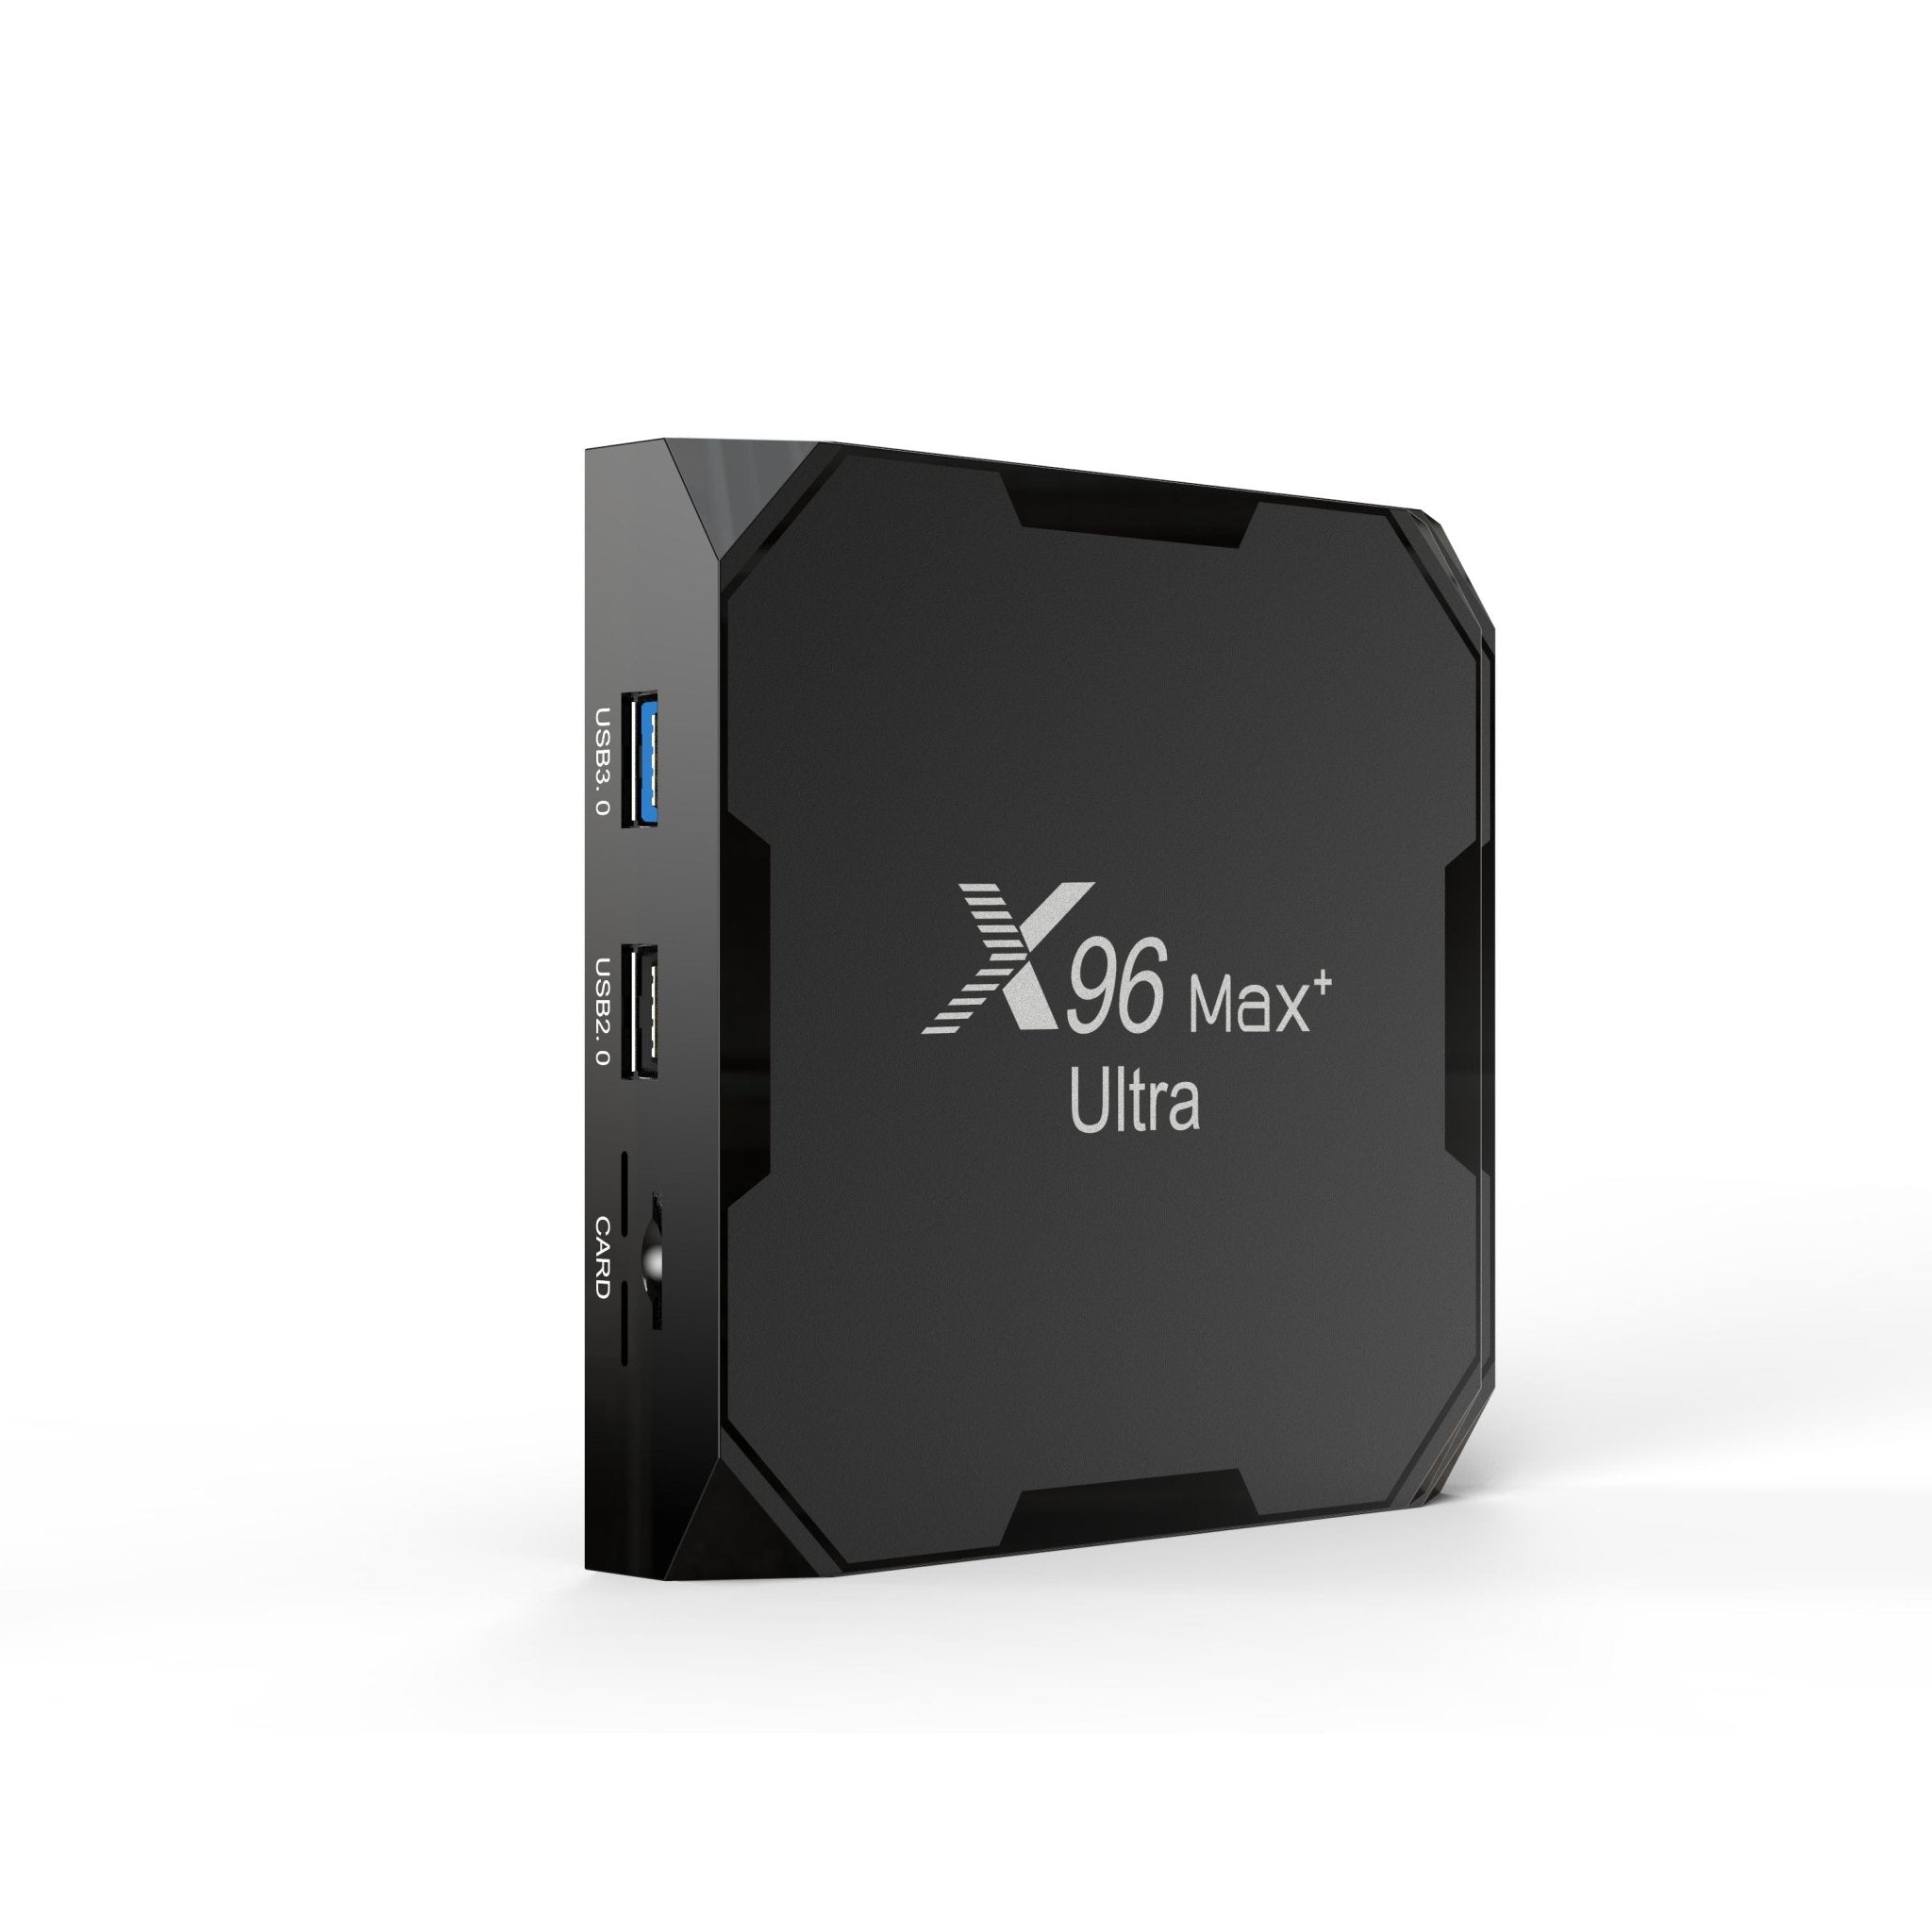 X96 Max TV Box Features Amlogic S905X2 Processor, Android 8.1 OS - CNX  Software